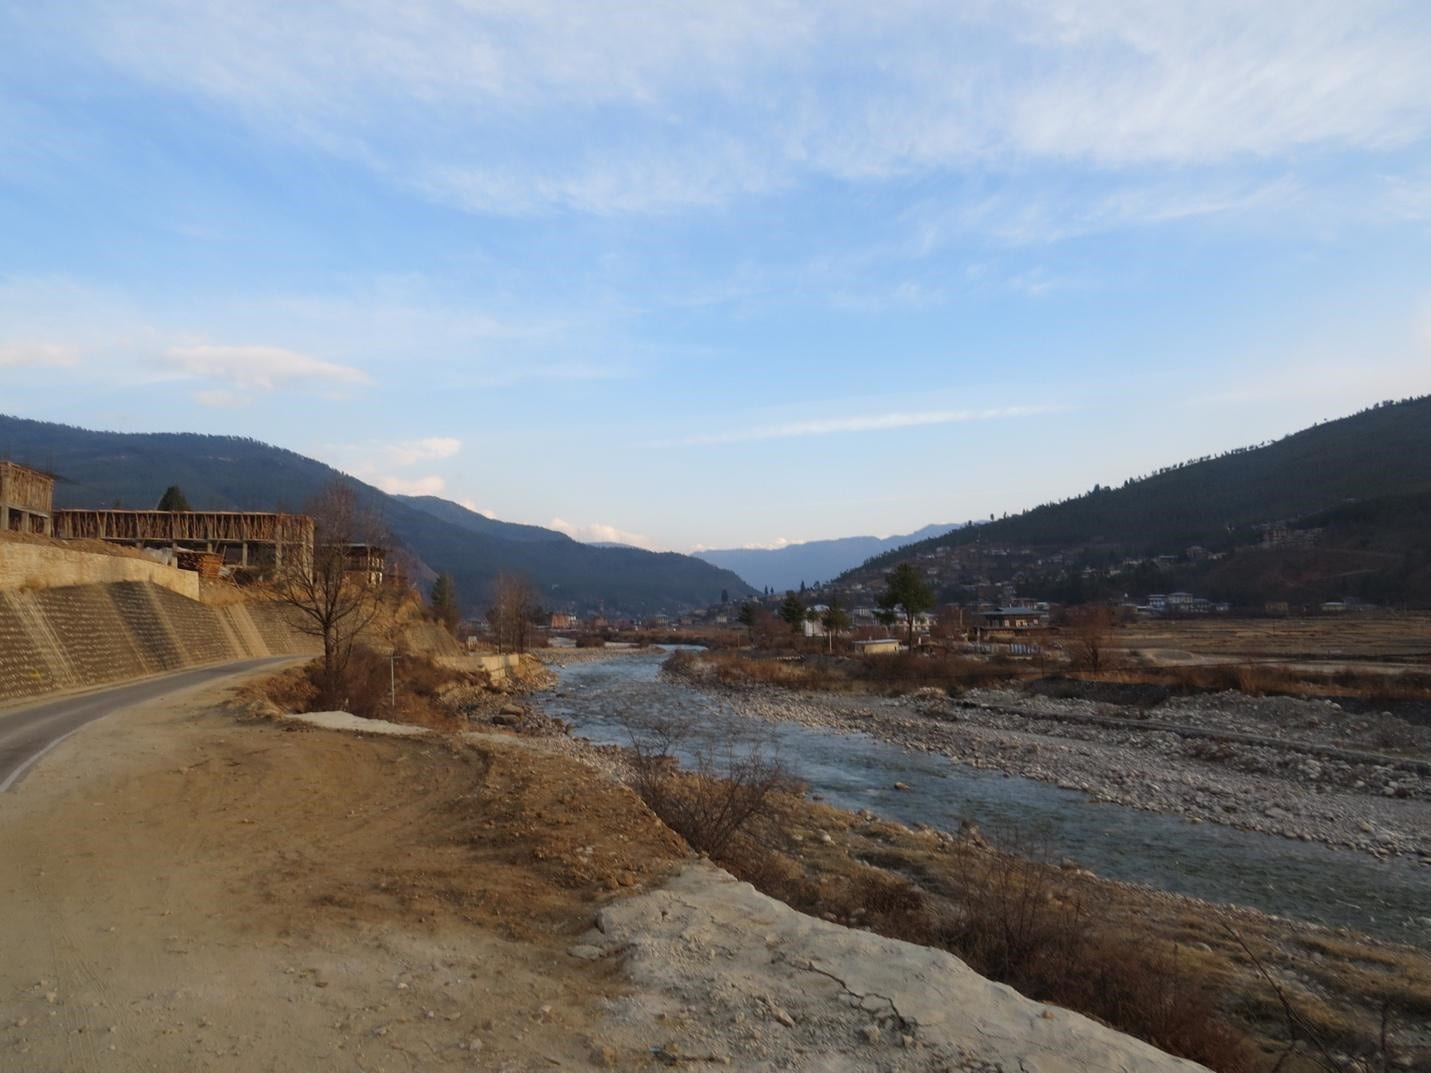 Landscape with river and blue sky in Bhutan